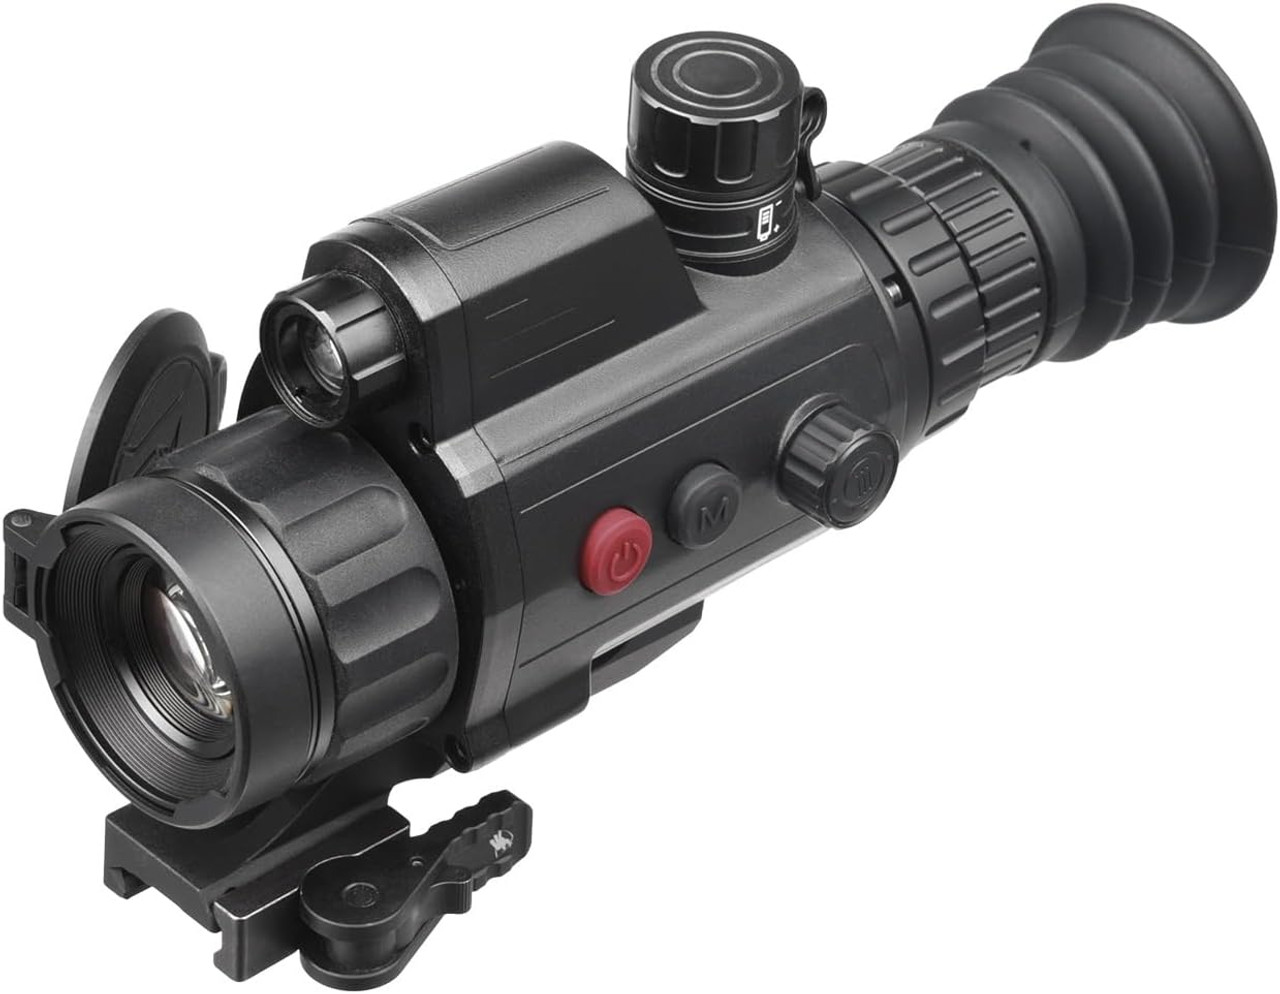 AGM Neith DS34MP Digital Day&Night Vision Rifle Scope 2560x1440 Resolution